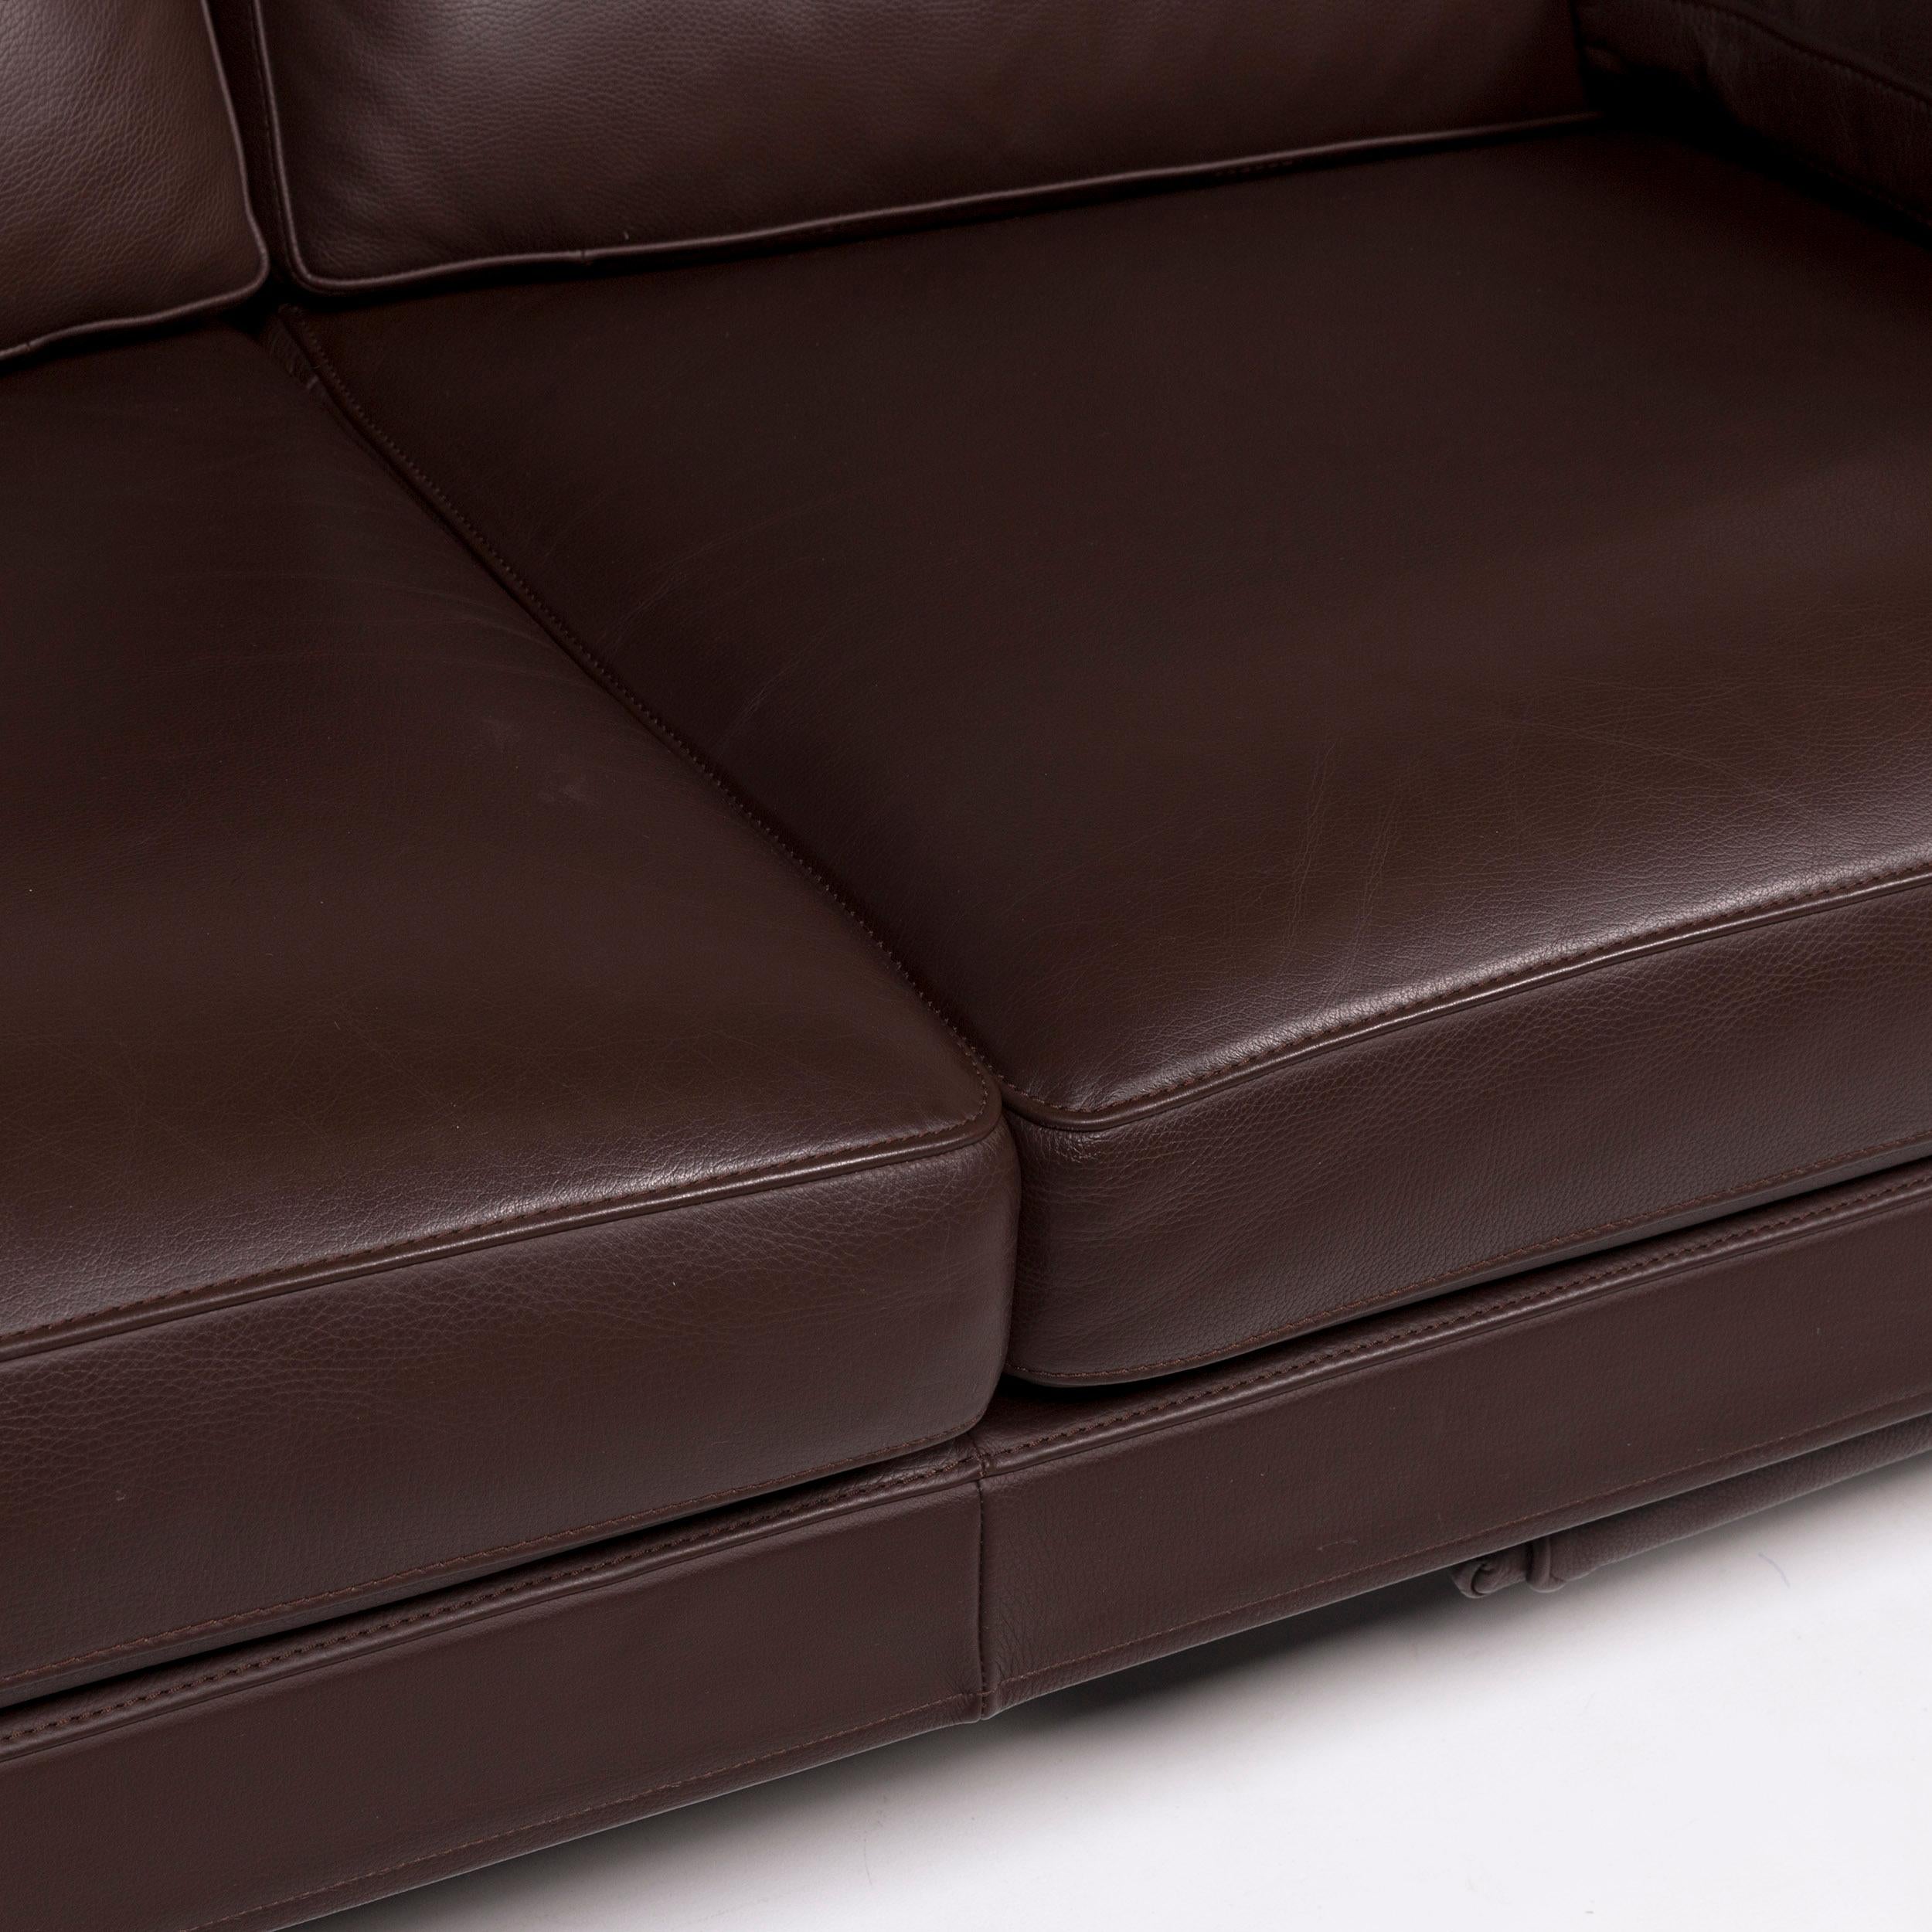 Swiss FSM Clarus Leather Sofa Set Brown Dark Brown 1 Three-Seat 1 Two-Seat For Sale